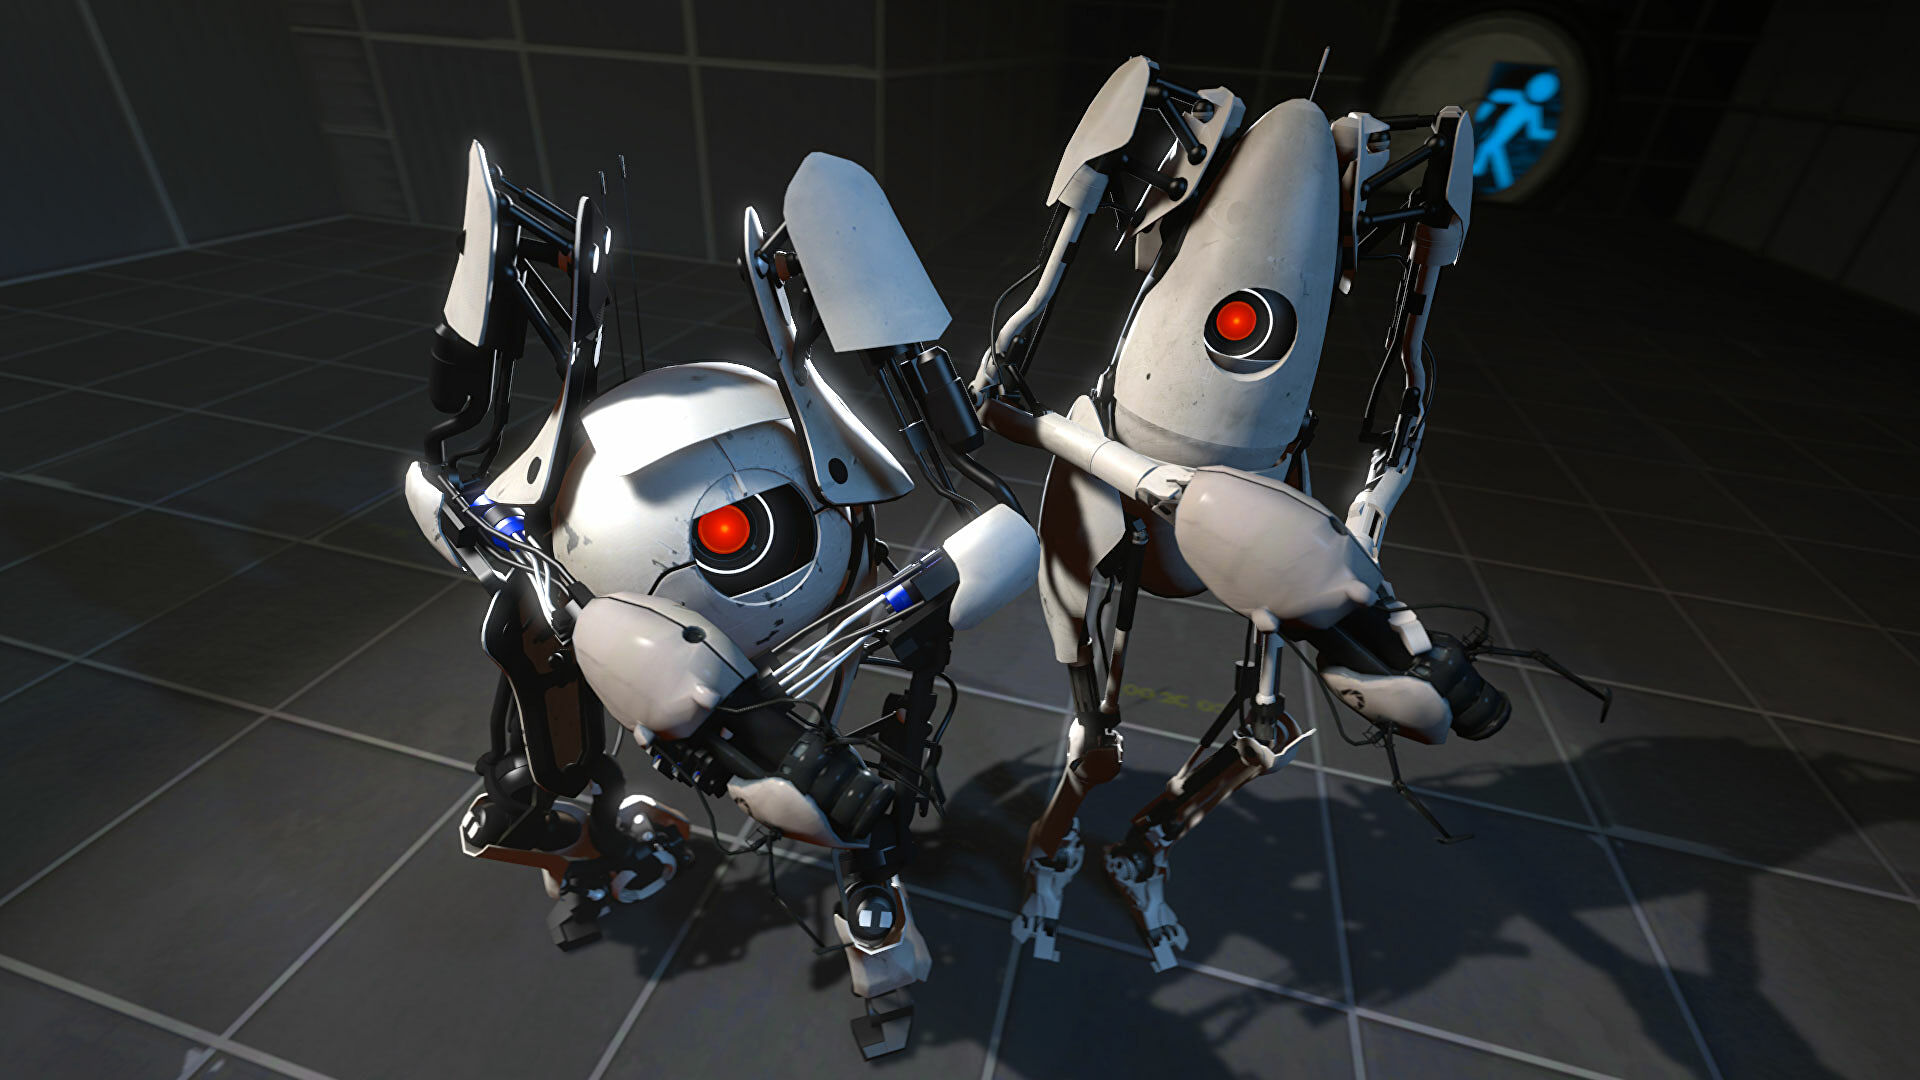 Portal writer says people at Valve like his "pretty awesome" idea for Portal 3